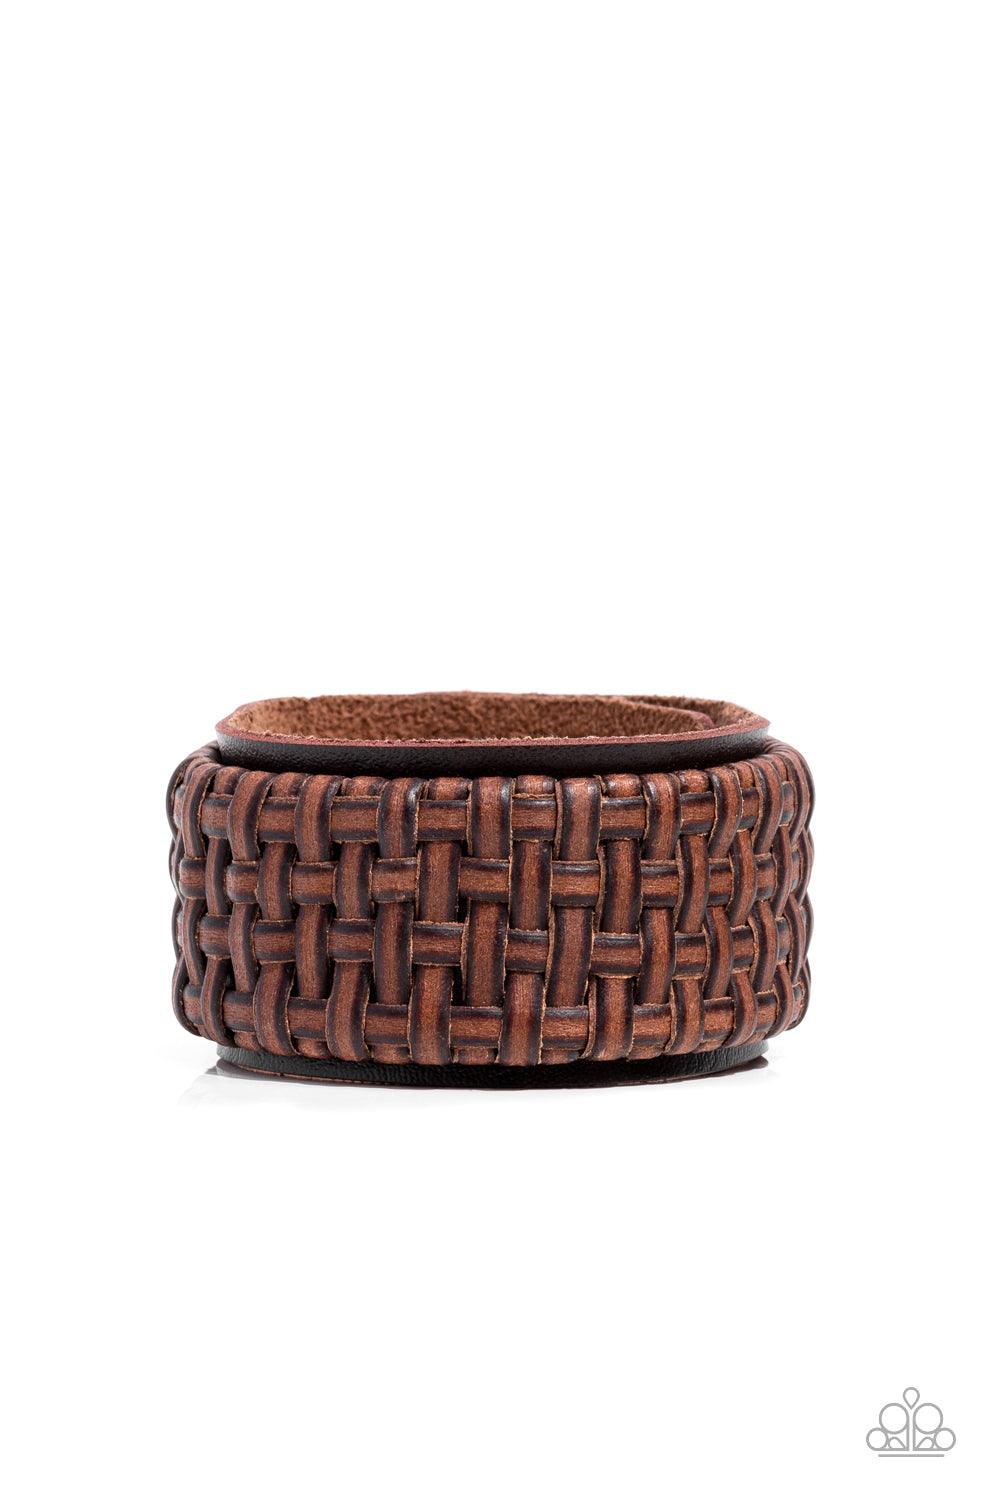 Paparazzi Accessories Urban Expansion - Brown Distressed leather laces weave into a wicker-like pattern, creating a thick band of texture that wraps around a leather band. The textured overlay is studded in place across the front of the brown leather band